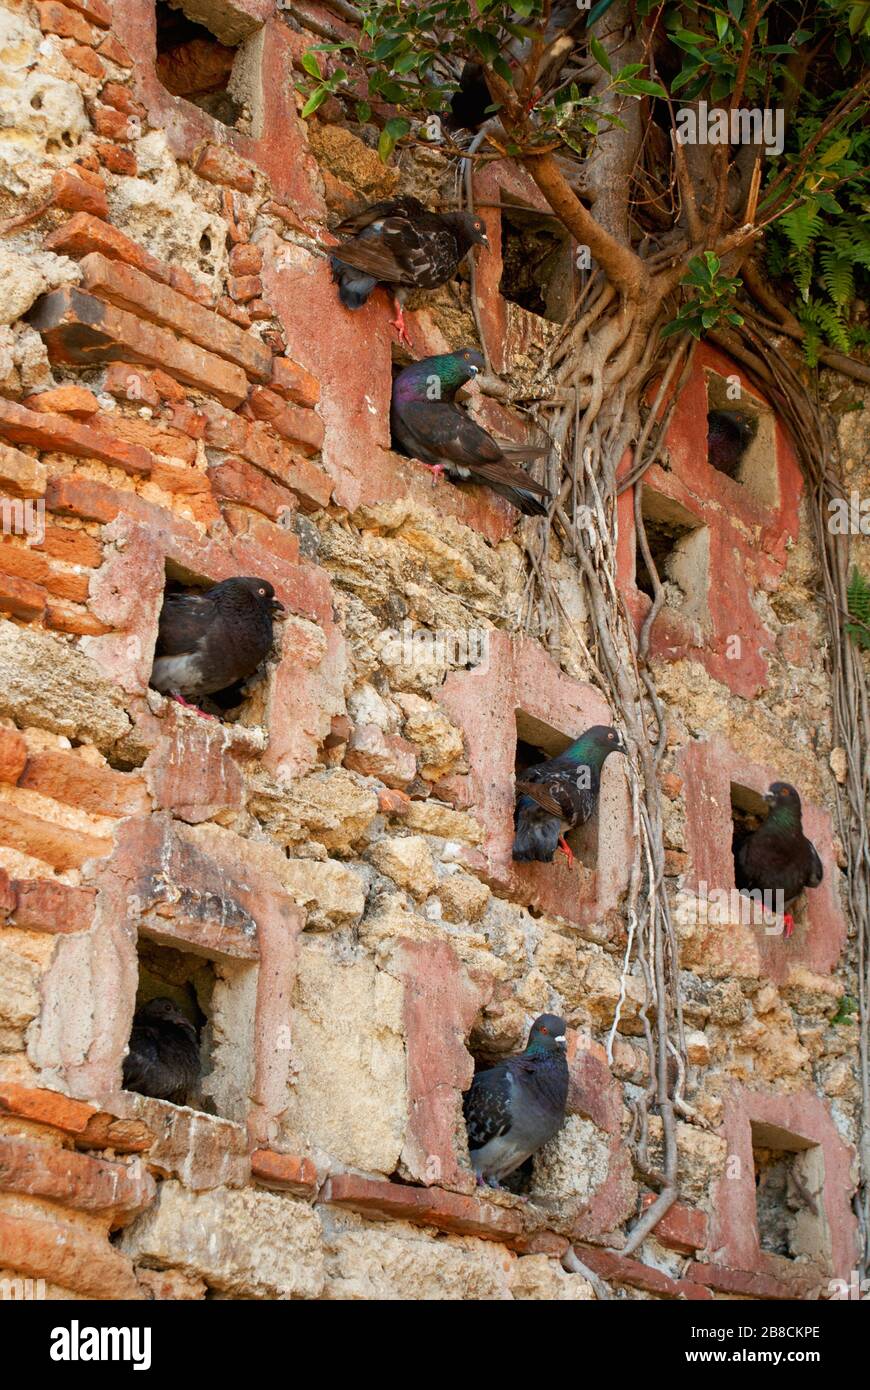 A group of pigeons inside the holes of an old building in Parque Las Palomas, San Juan, Puerto Rico. Stock Photo